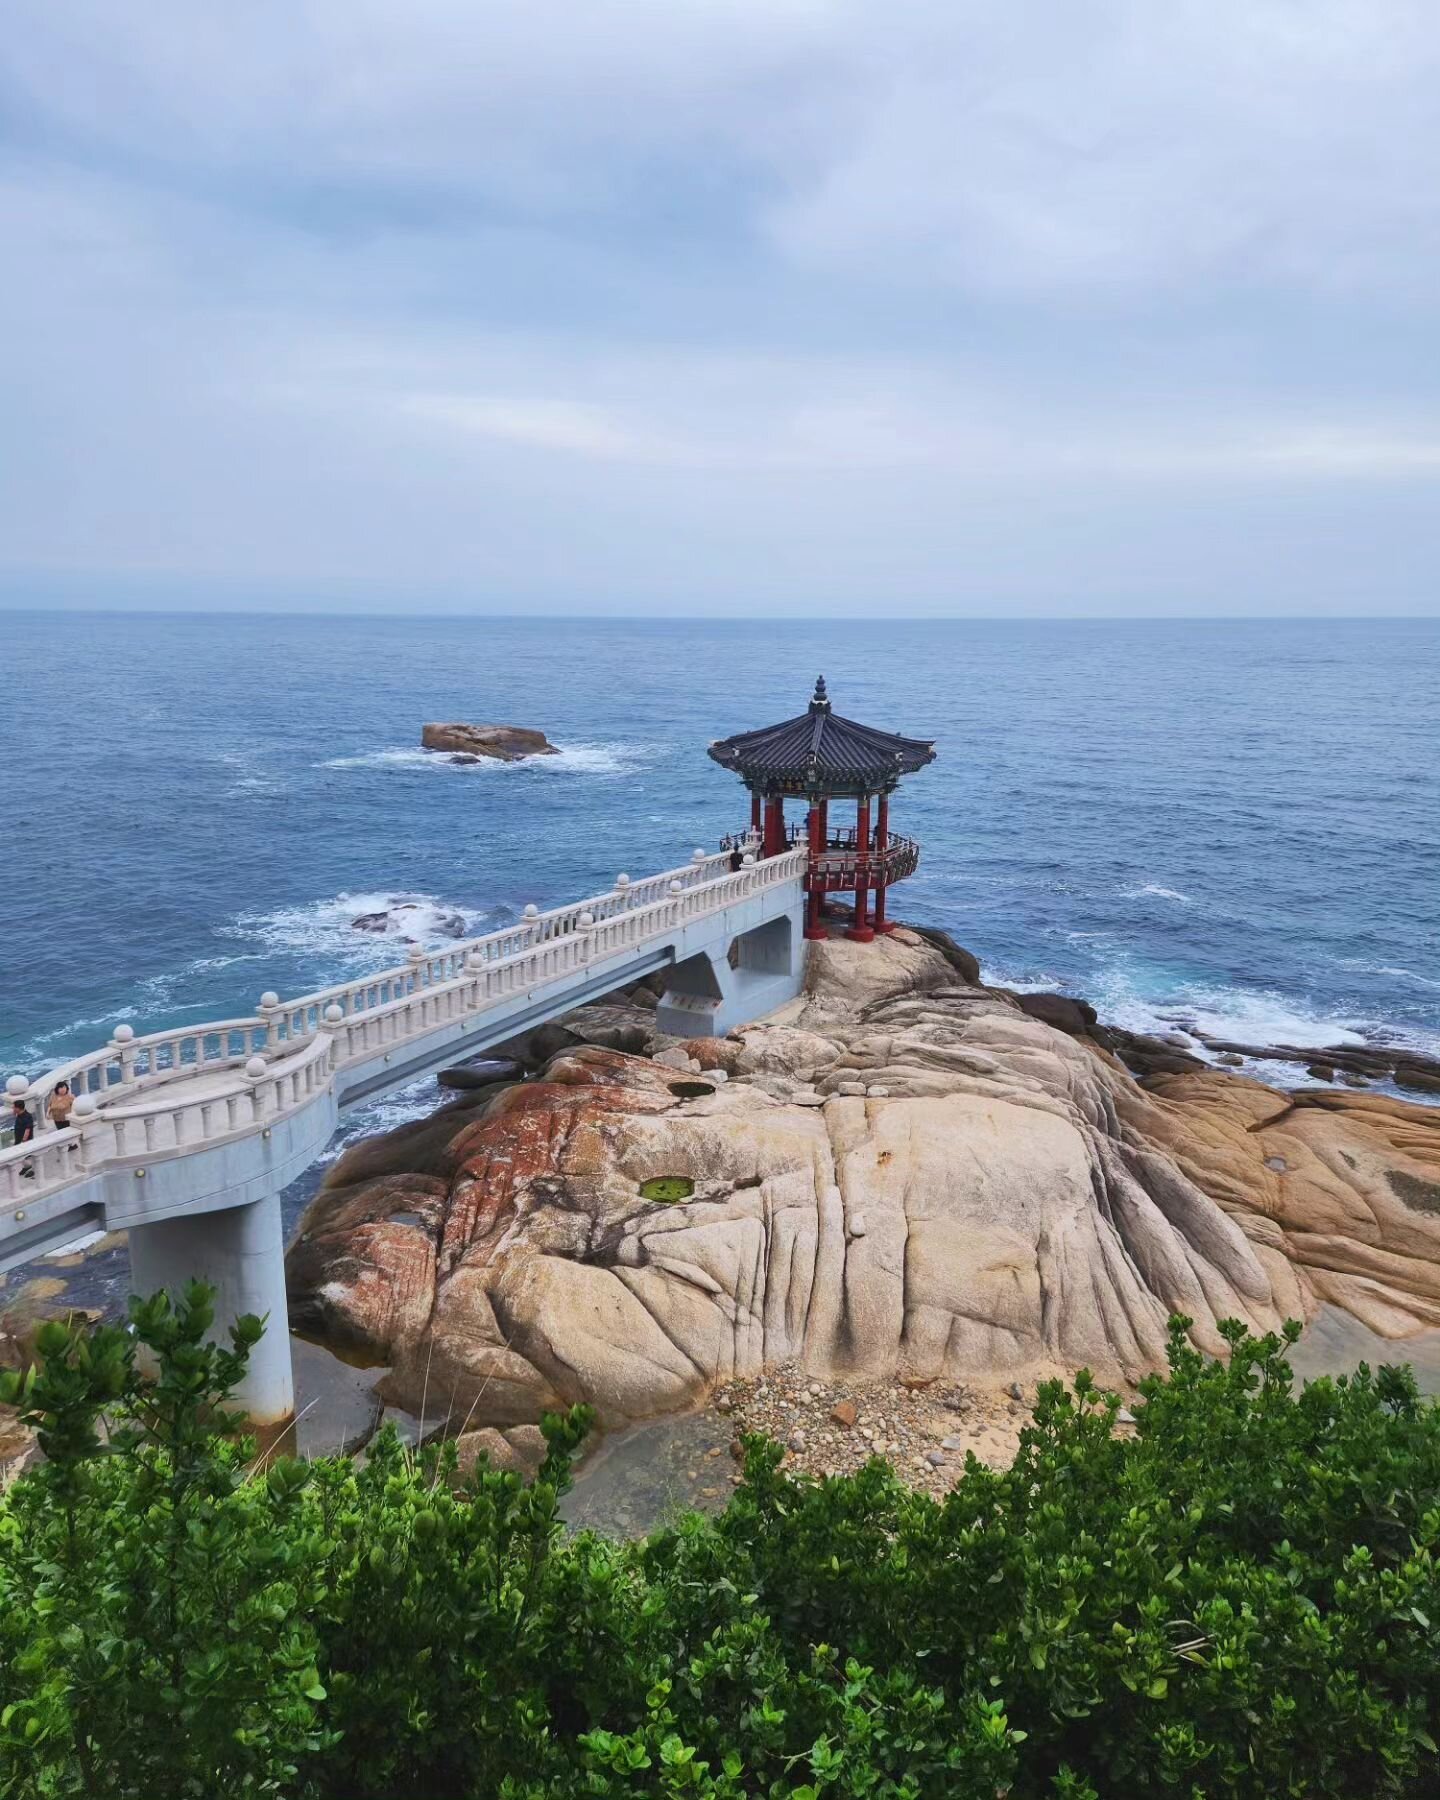 a summer in sokcho 🇰🇷 

recounting my perfect day in sokcho last july ☺️ this was my first time travelling solo outside of familiar seoul, so it was definitely nerve-racking. but sokcho instantly made me feel  welcomed 😌 new video up on my yt chan